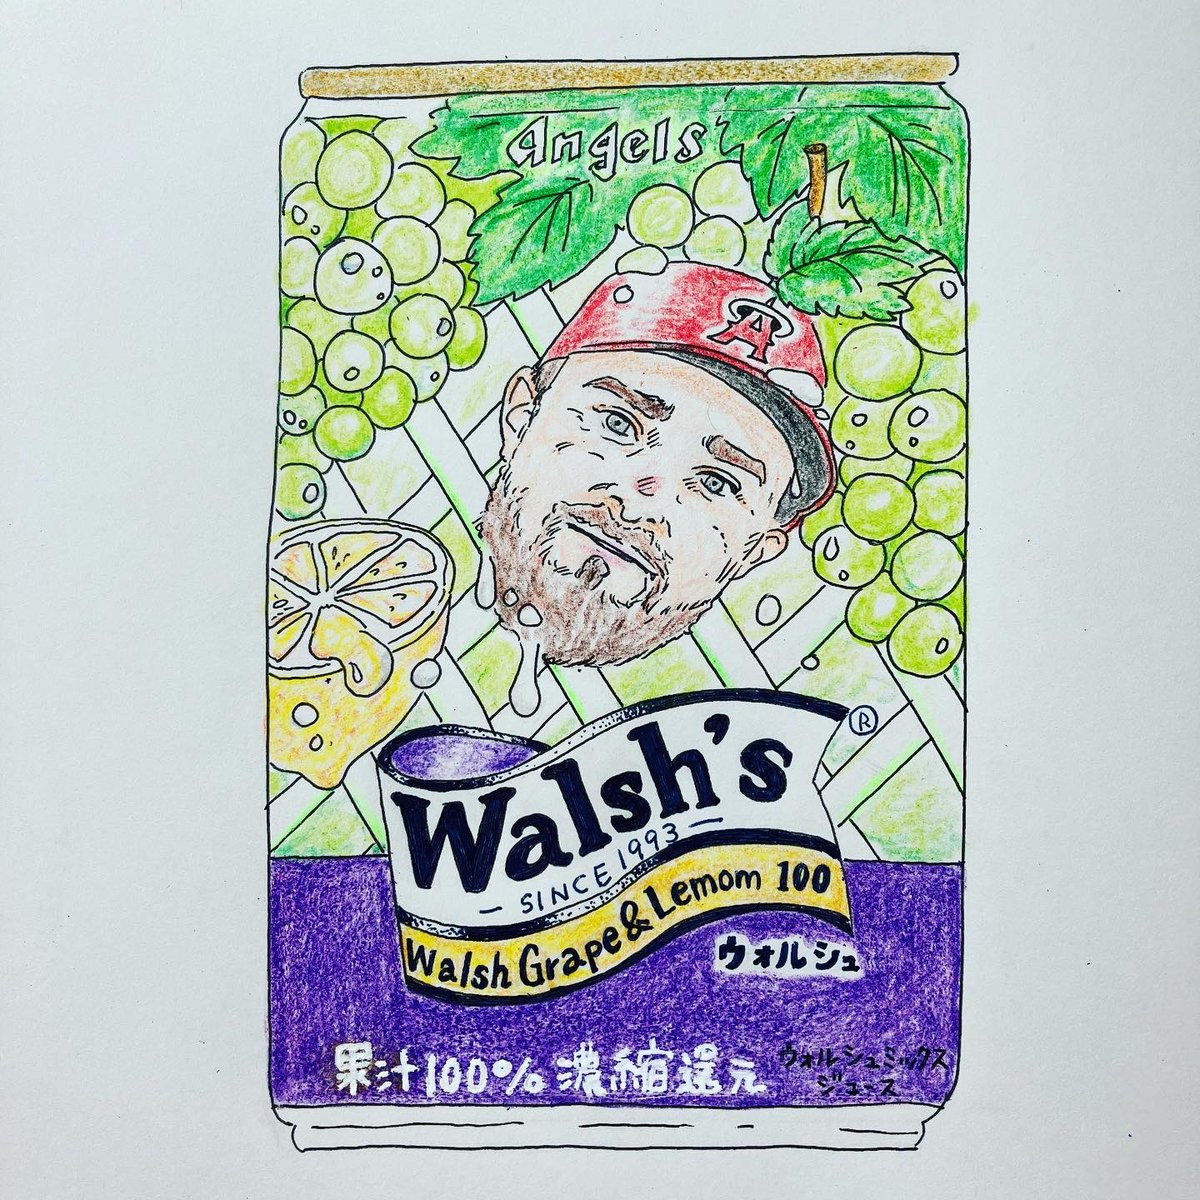 Delicious juice🍹Welch's‼️
...Walsh's❓

#jaredwalsh #angels #angelsbaseball